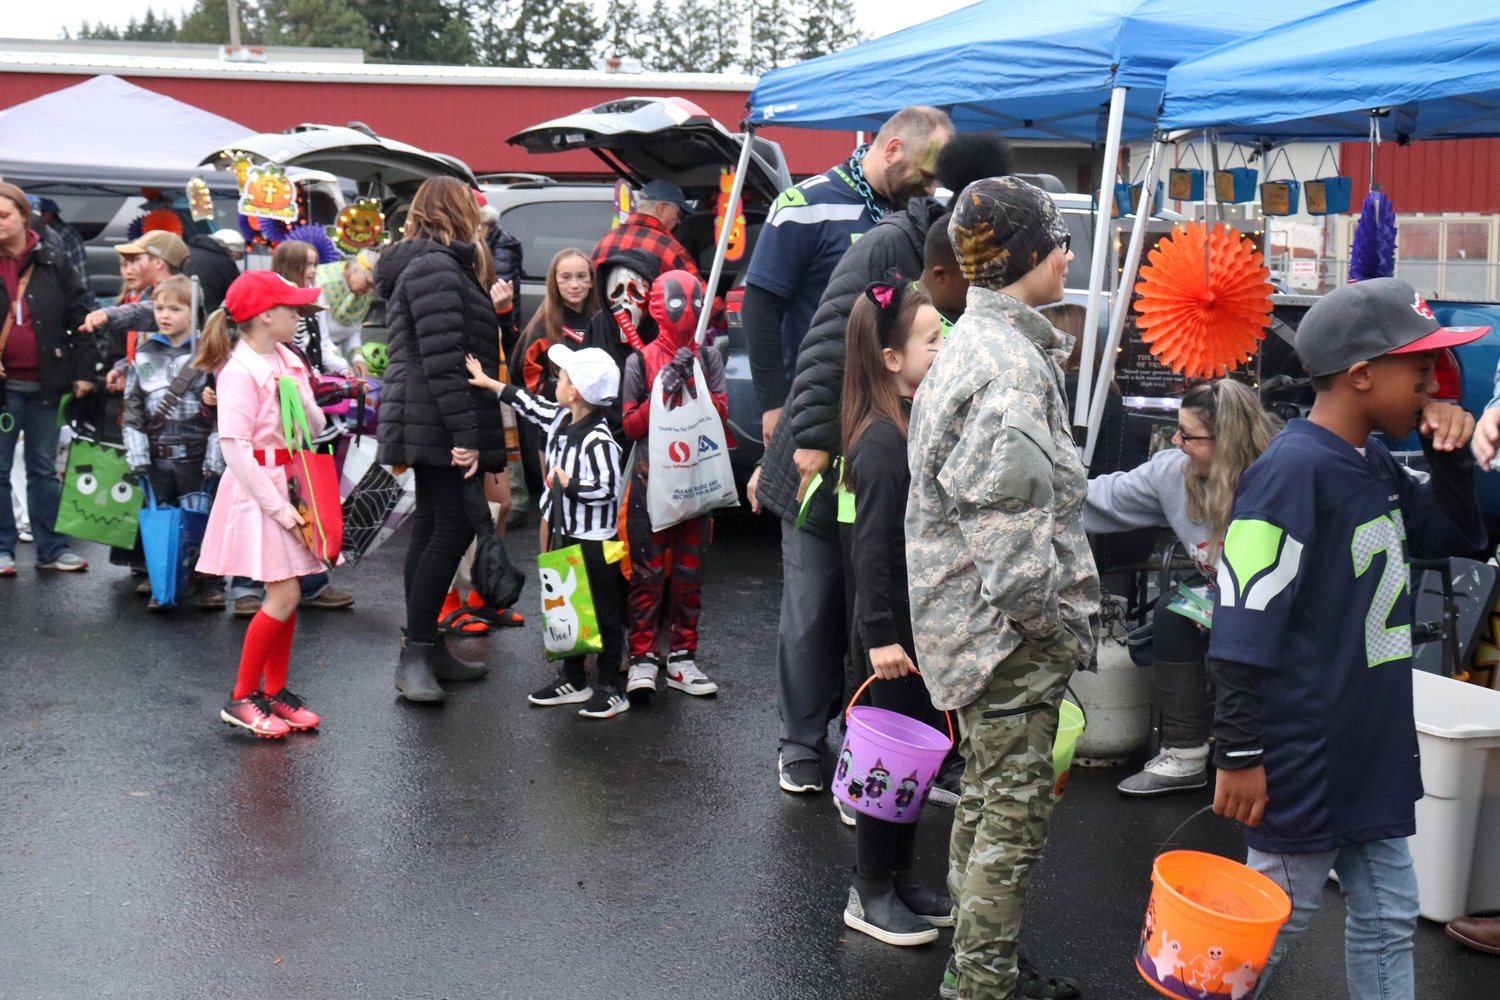 Trick-or-treaters go between cars for candy at Napavine Assembly of God Church’s trunk or treat event on Monday.